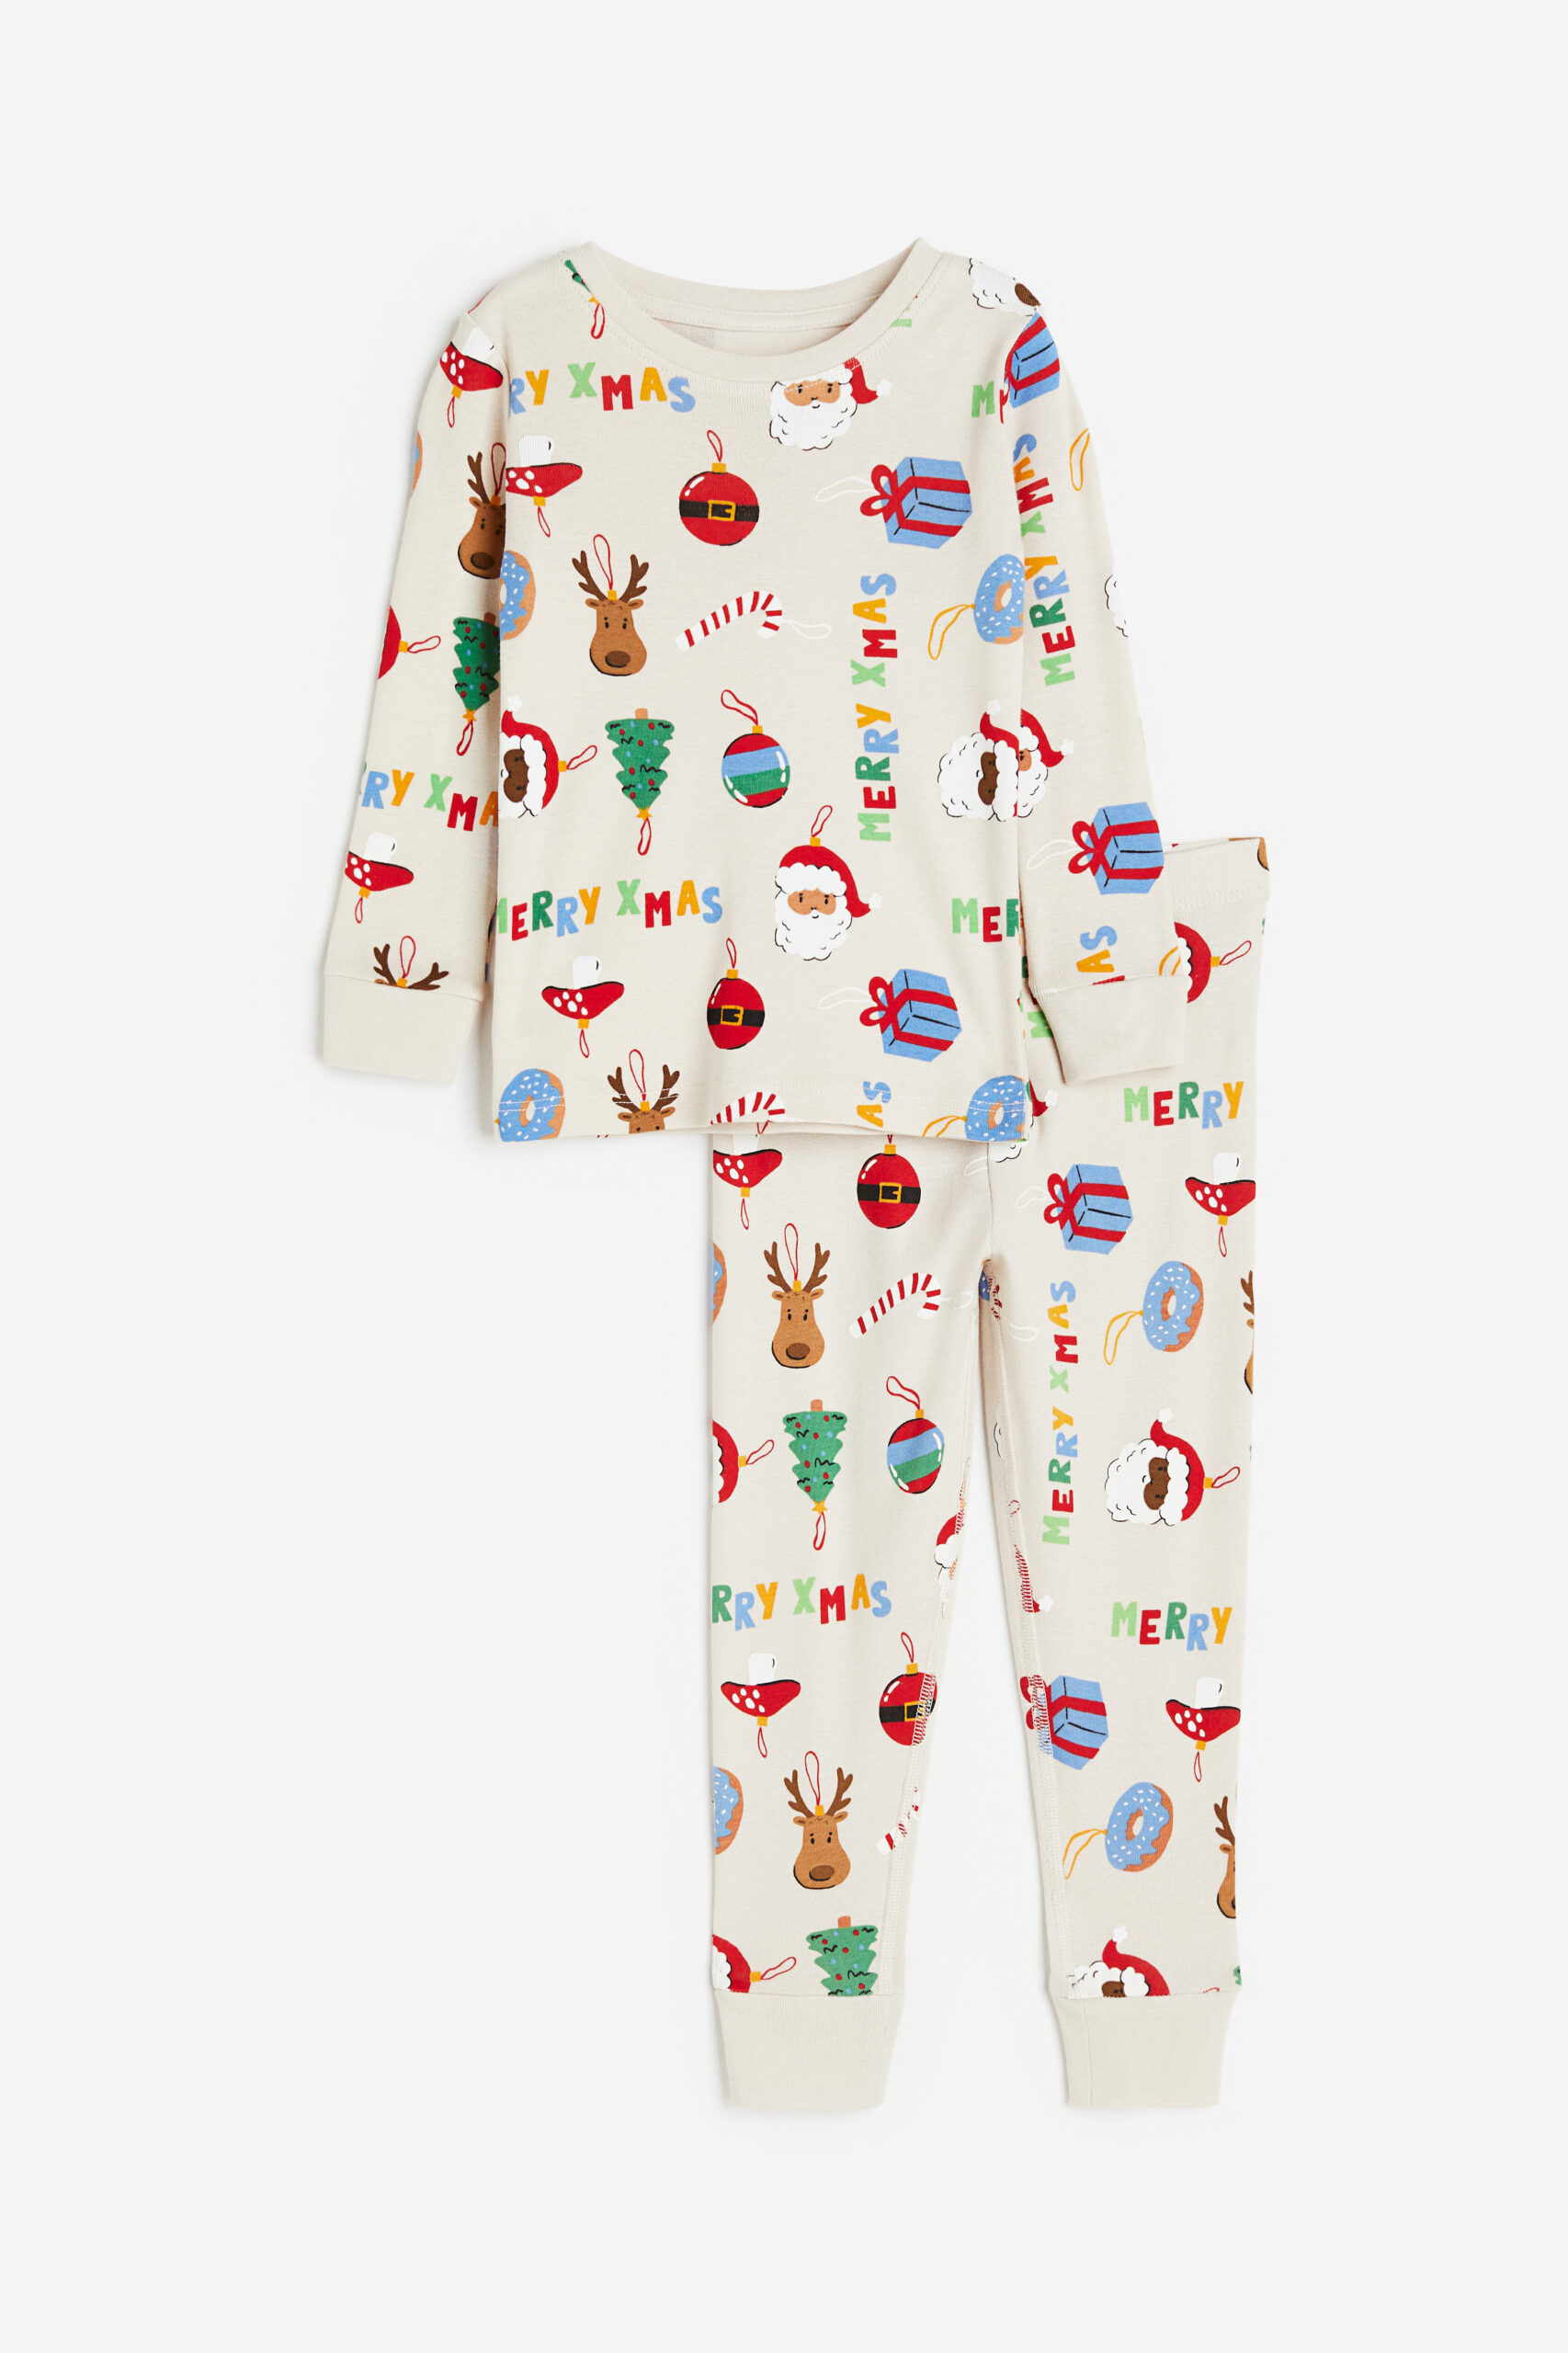 boys pajama set with "merry xmas" in writing and cartoon reindeer, ornaments, presents and trees